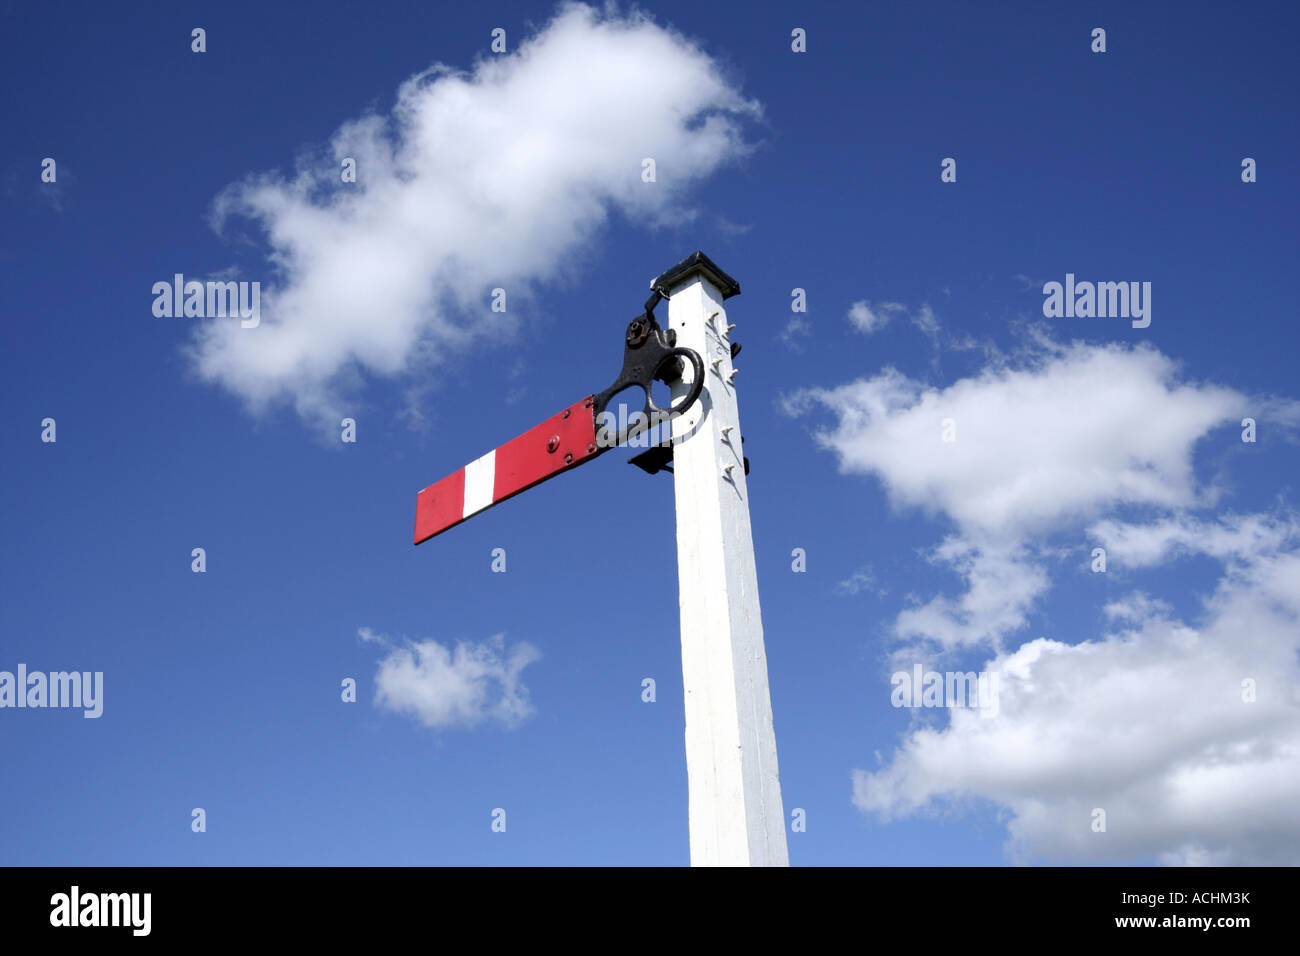 Red and white railway signal in a blue sky Stock Photo